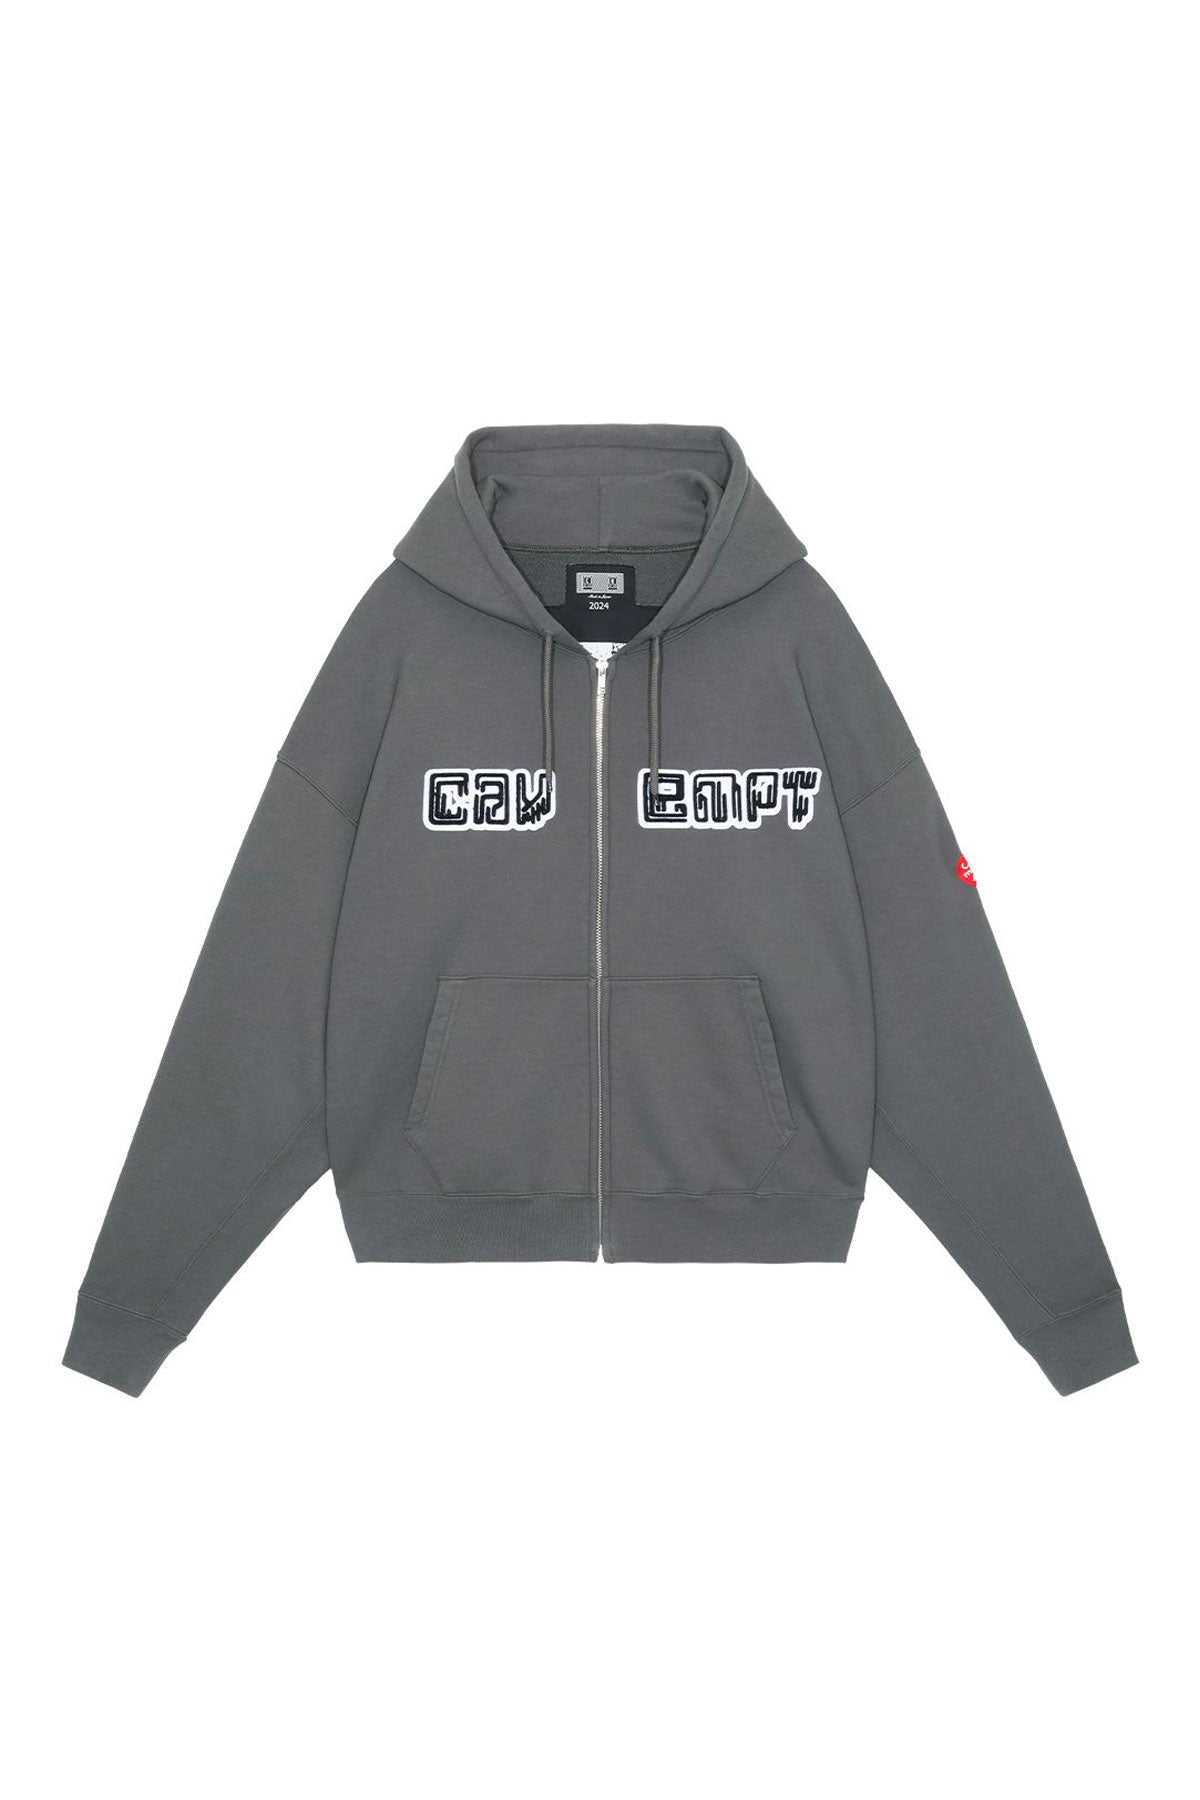 The CAV EMPT - CAV EMPT EMBROIDERY ZIP HOODY  available online with global shipping, and in PAM Stores Melbourne and Sydney.